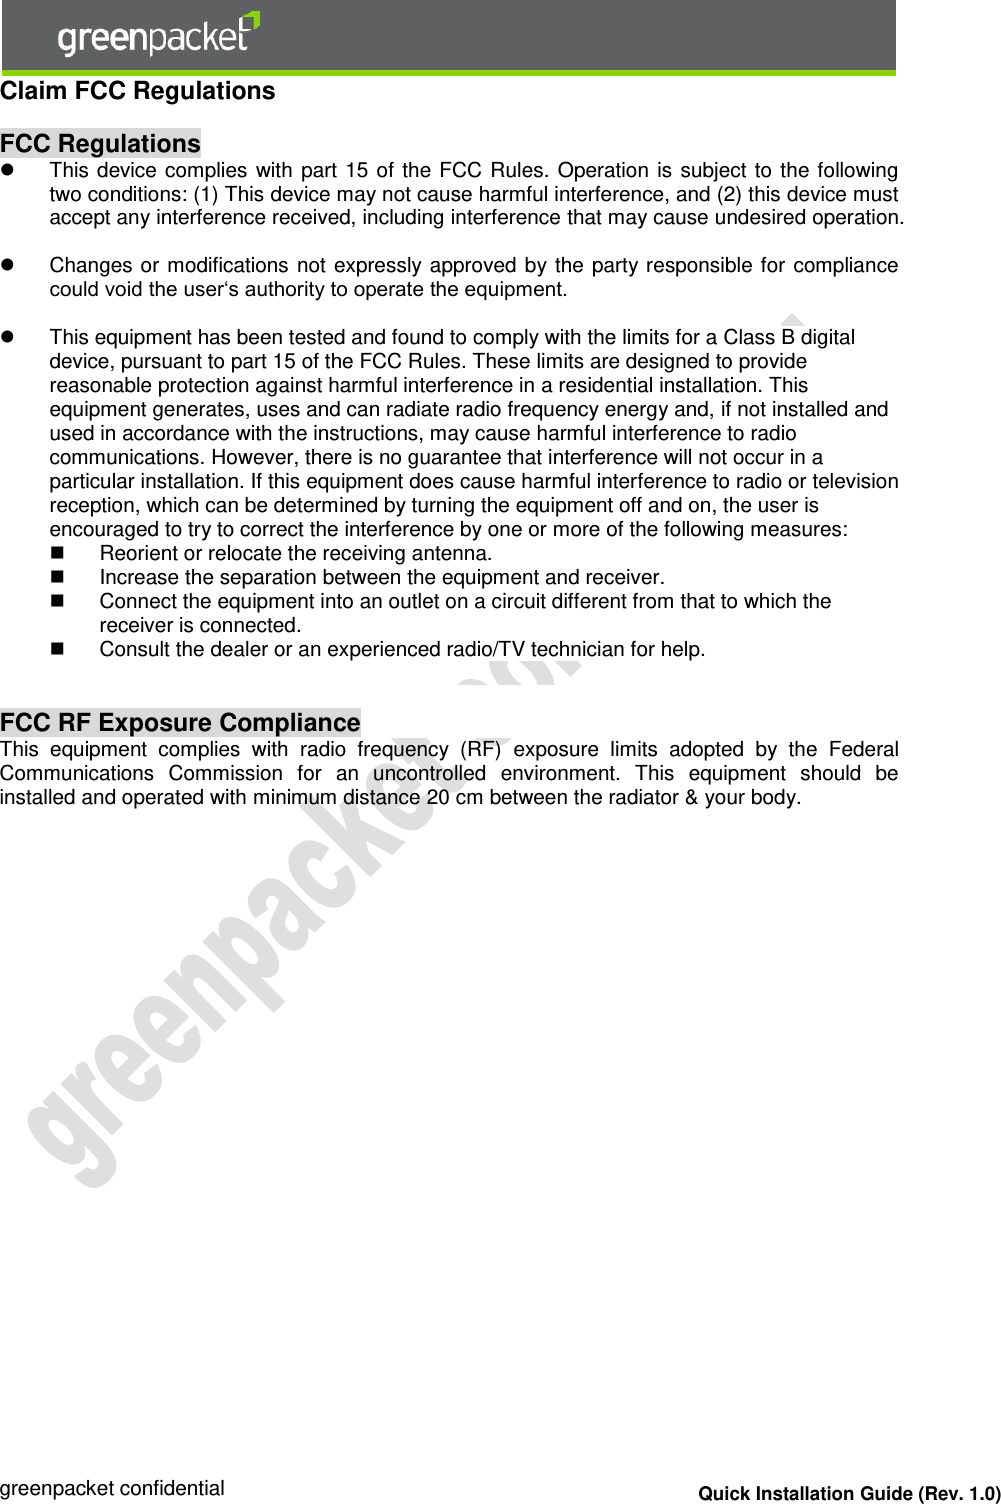  greenpacket confidential Quick Installation Guide (Rev. 1.0) Claim FCC Regulations   FCC Regulations   This device complies with part 15 of the FCC Rules. Operation is subject to the following two conditions: (1) This device may not cause harmful interference, and (2) this device must accept any interference received, including interference that may cause undesired operation.    Changes or modifications not expressly approved by the party responsible for compliance could void the user‘s authority to operate the equipment.    This equipment has been tested and found to comply with the limits for a Class B digital device, pursuant to part 15 of the FCC Rules. These limits are designed to provide reasonable protection against harmful interference in a residential installation. This equipment generates, uses and can radiate radio frequency energy and, if not installed and used in accordance with the instructions, may cause harmful interference to radio communications. However, there is no guarantee that interference will not occur in a particular installation. If this equipment does cause harmful interference to radio or television reception, which can be determined by turning the equipment off and on, the user is encouraged to try to correct the interference by one or more of the following measures:   Reorient or relocate the receiving antenna.   Increase the separation between the equipment and receiver.   Connect the equipment into an outlet on a circuit different from that to which the receiver is connected.   Consult the dealer or an experienced radio/TV technician for help.   FCC RF Exposure Compliance This  equipment  complies  with  radio  frequency  (RF)  exposure  limits  adopted  by  the  Federal Communications  Commission  for  an  uncontrolled  environment.  This  equipment  should  be installed and operated with minimum distance 20 cm between the radiator &amp; your body.     